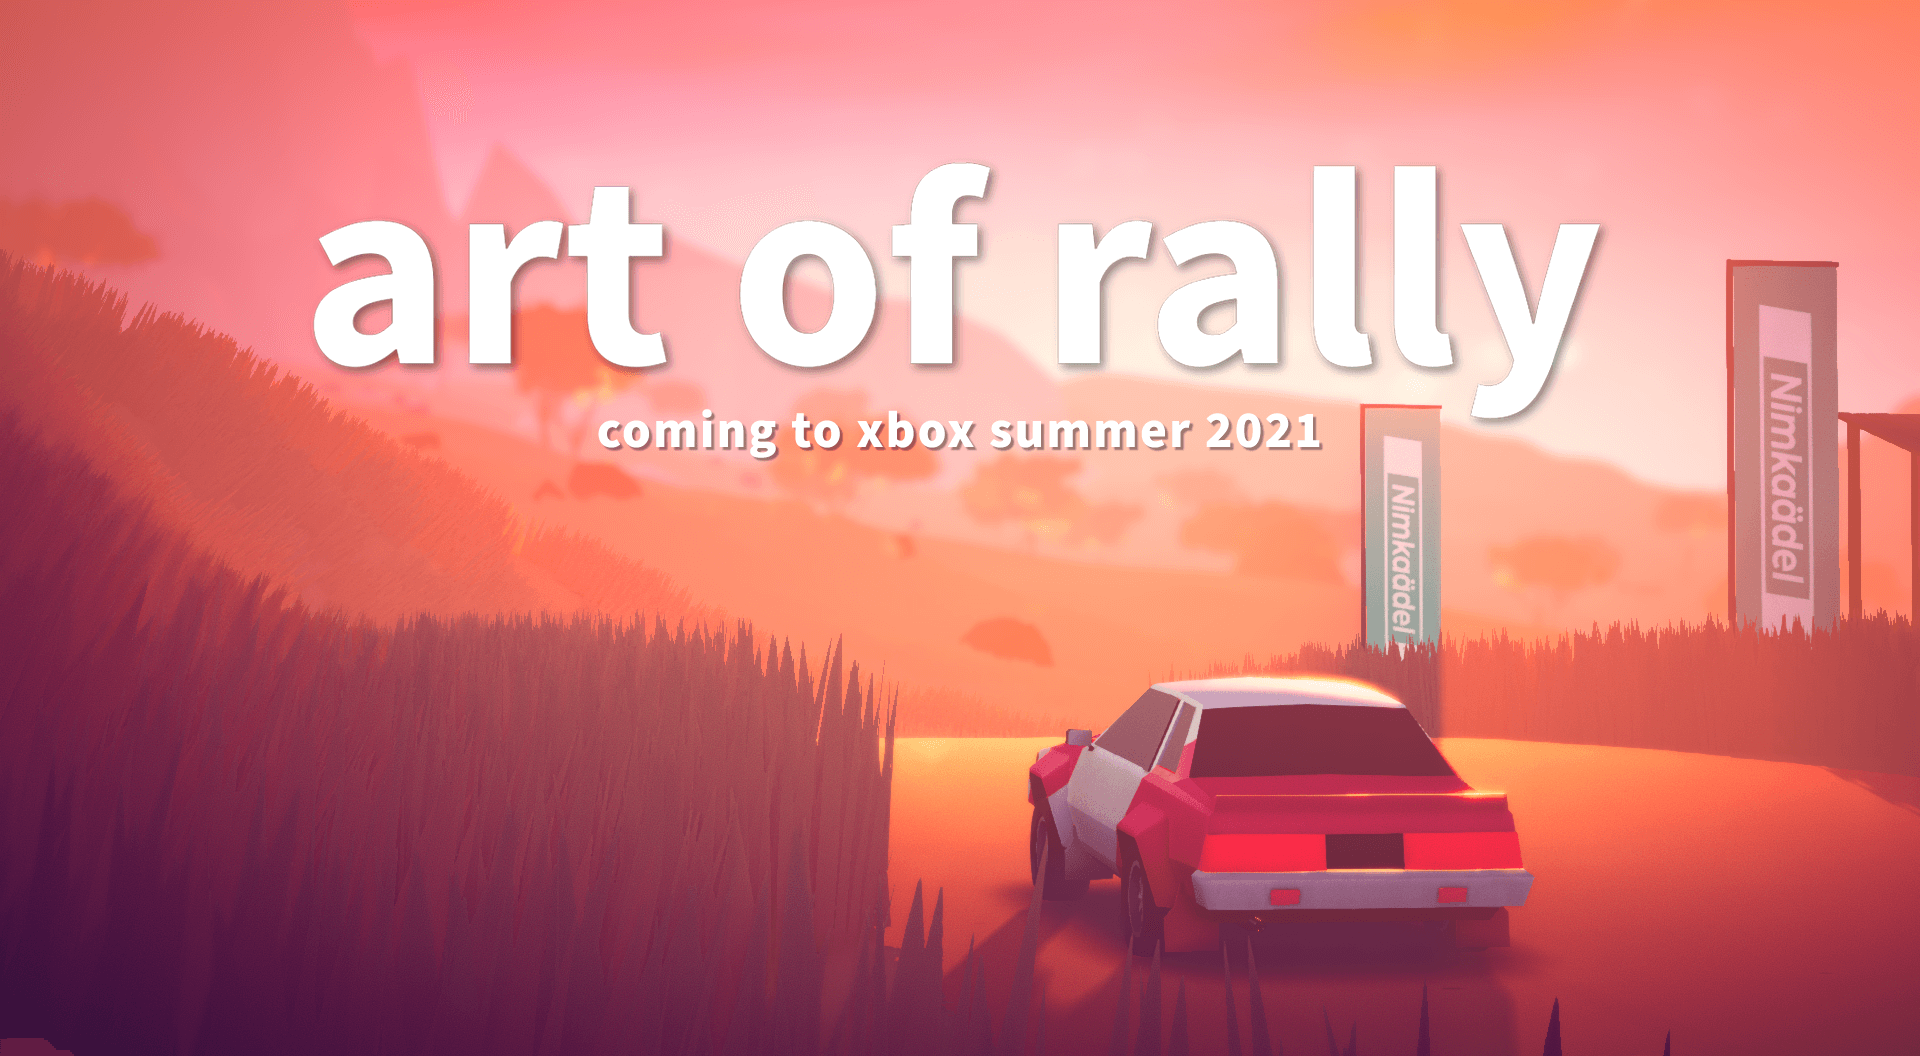 rally art Coming to Xbox Game Pass this summer